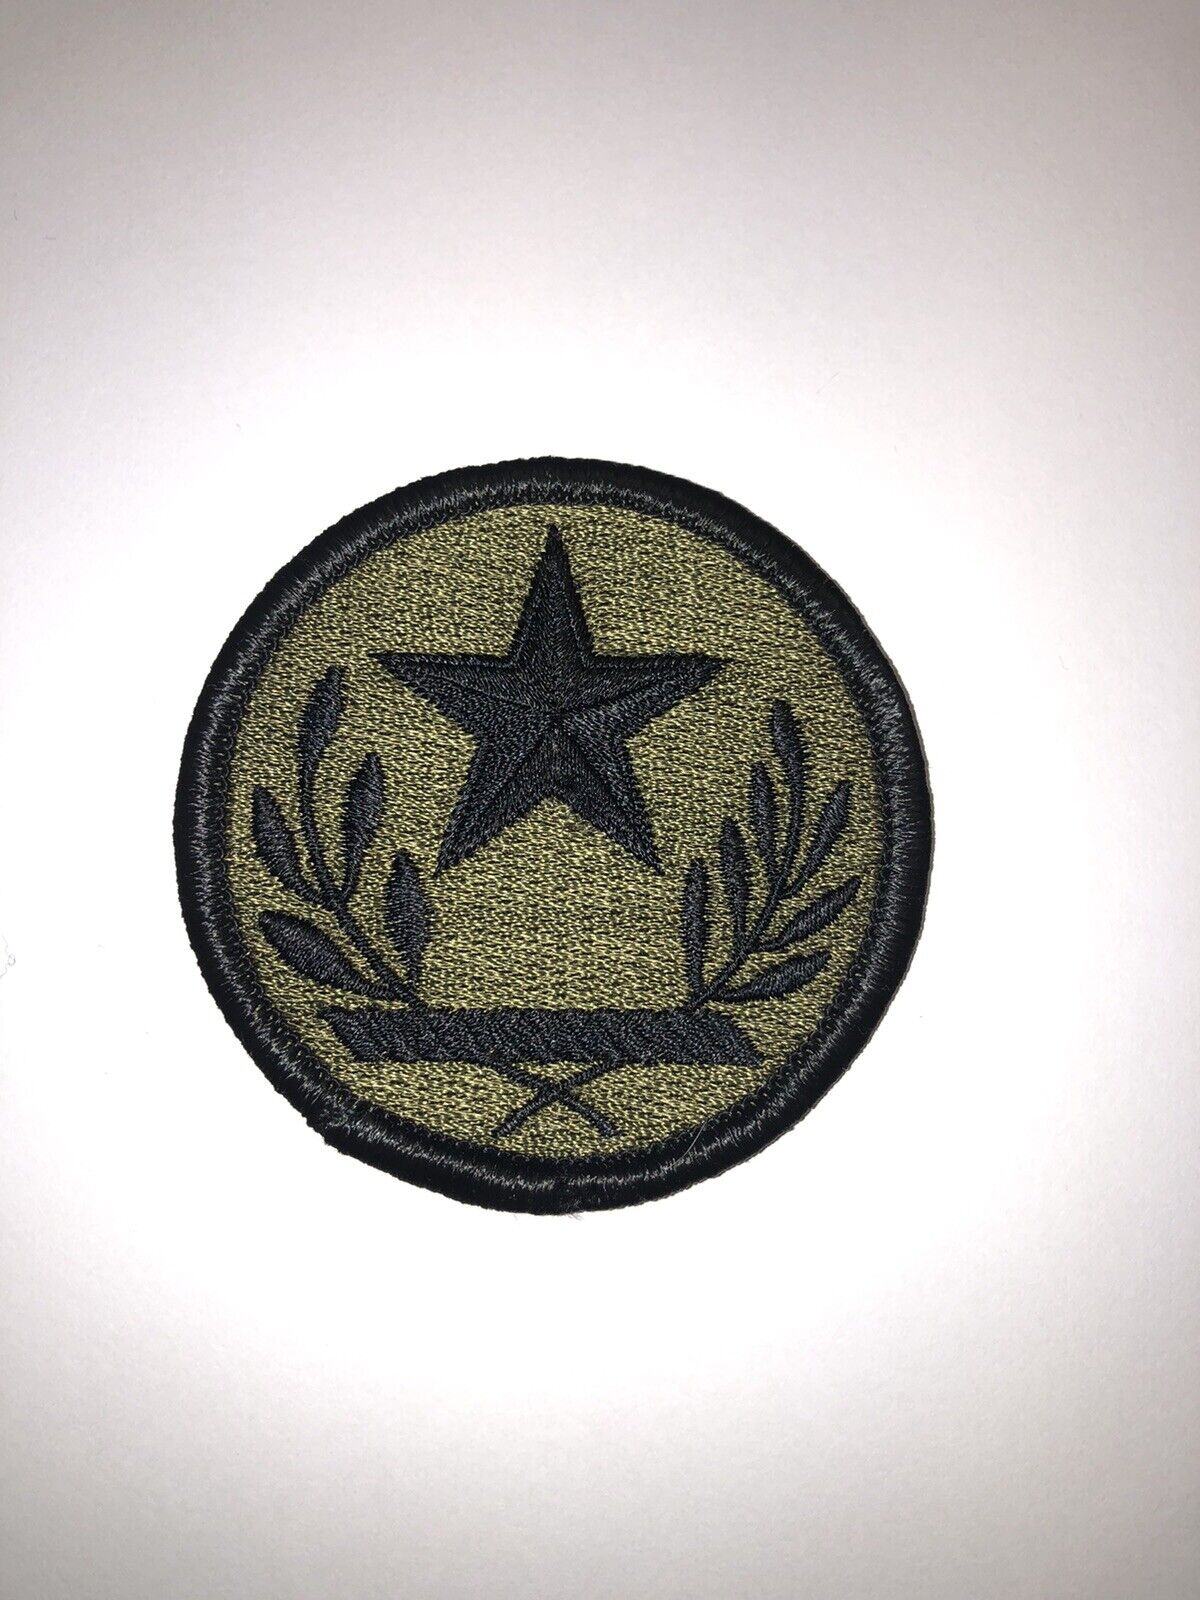 Texas National Guard Subdued BDU U.S. Army Patch